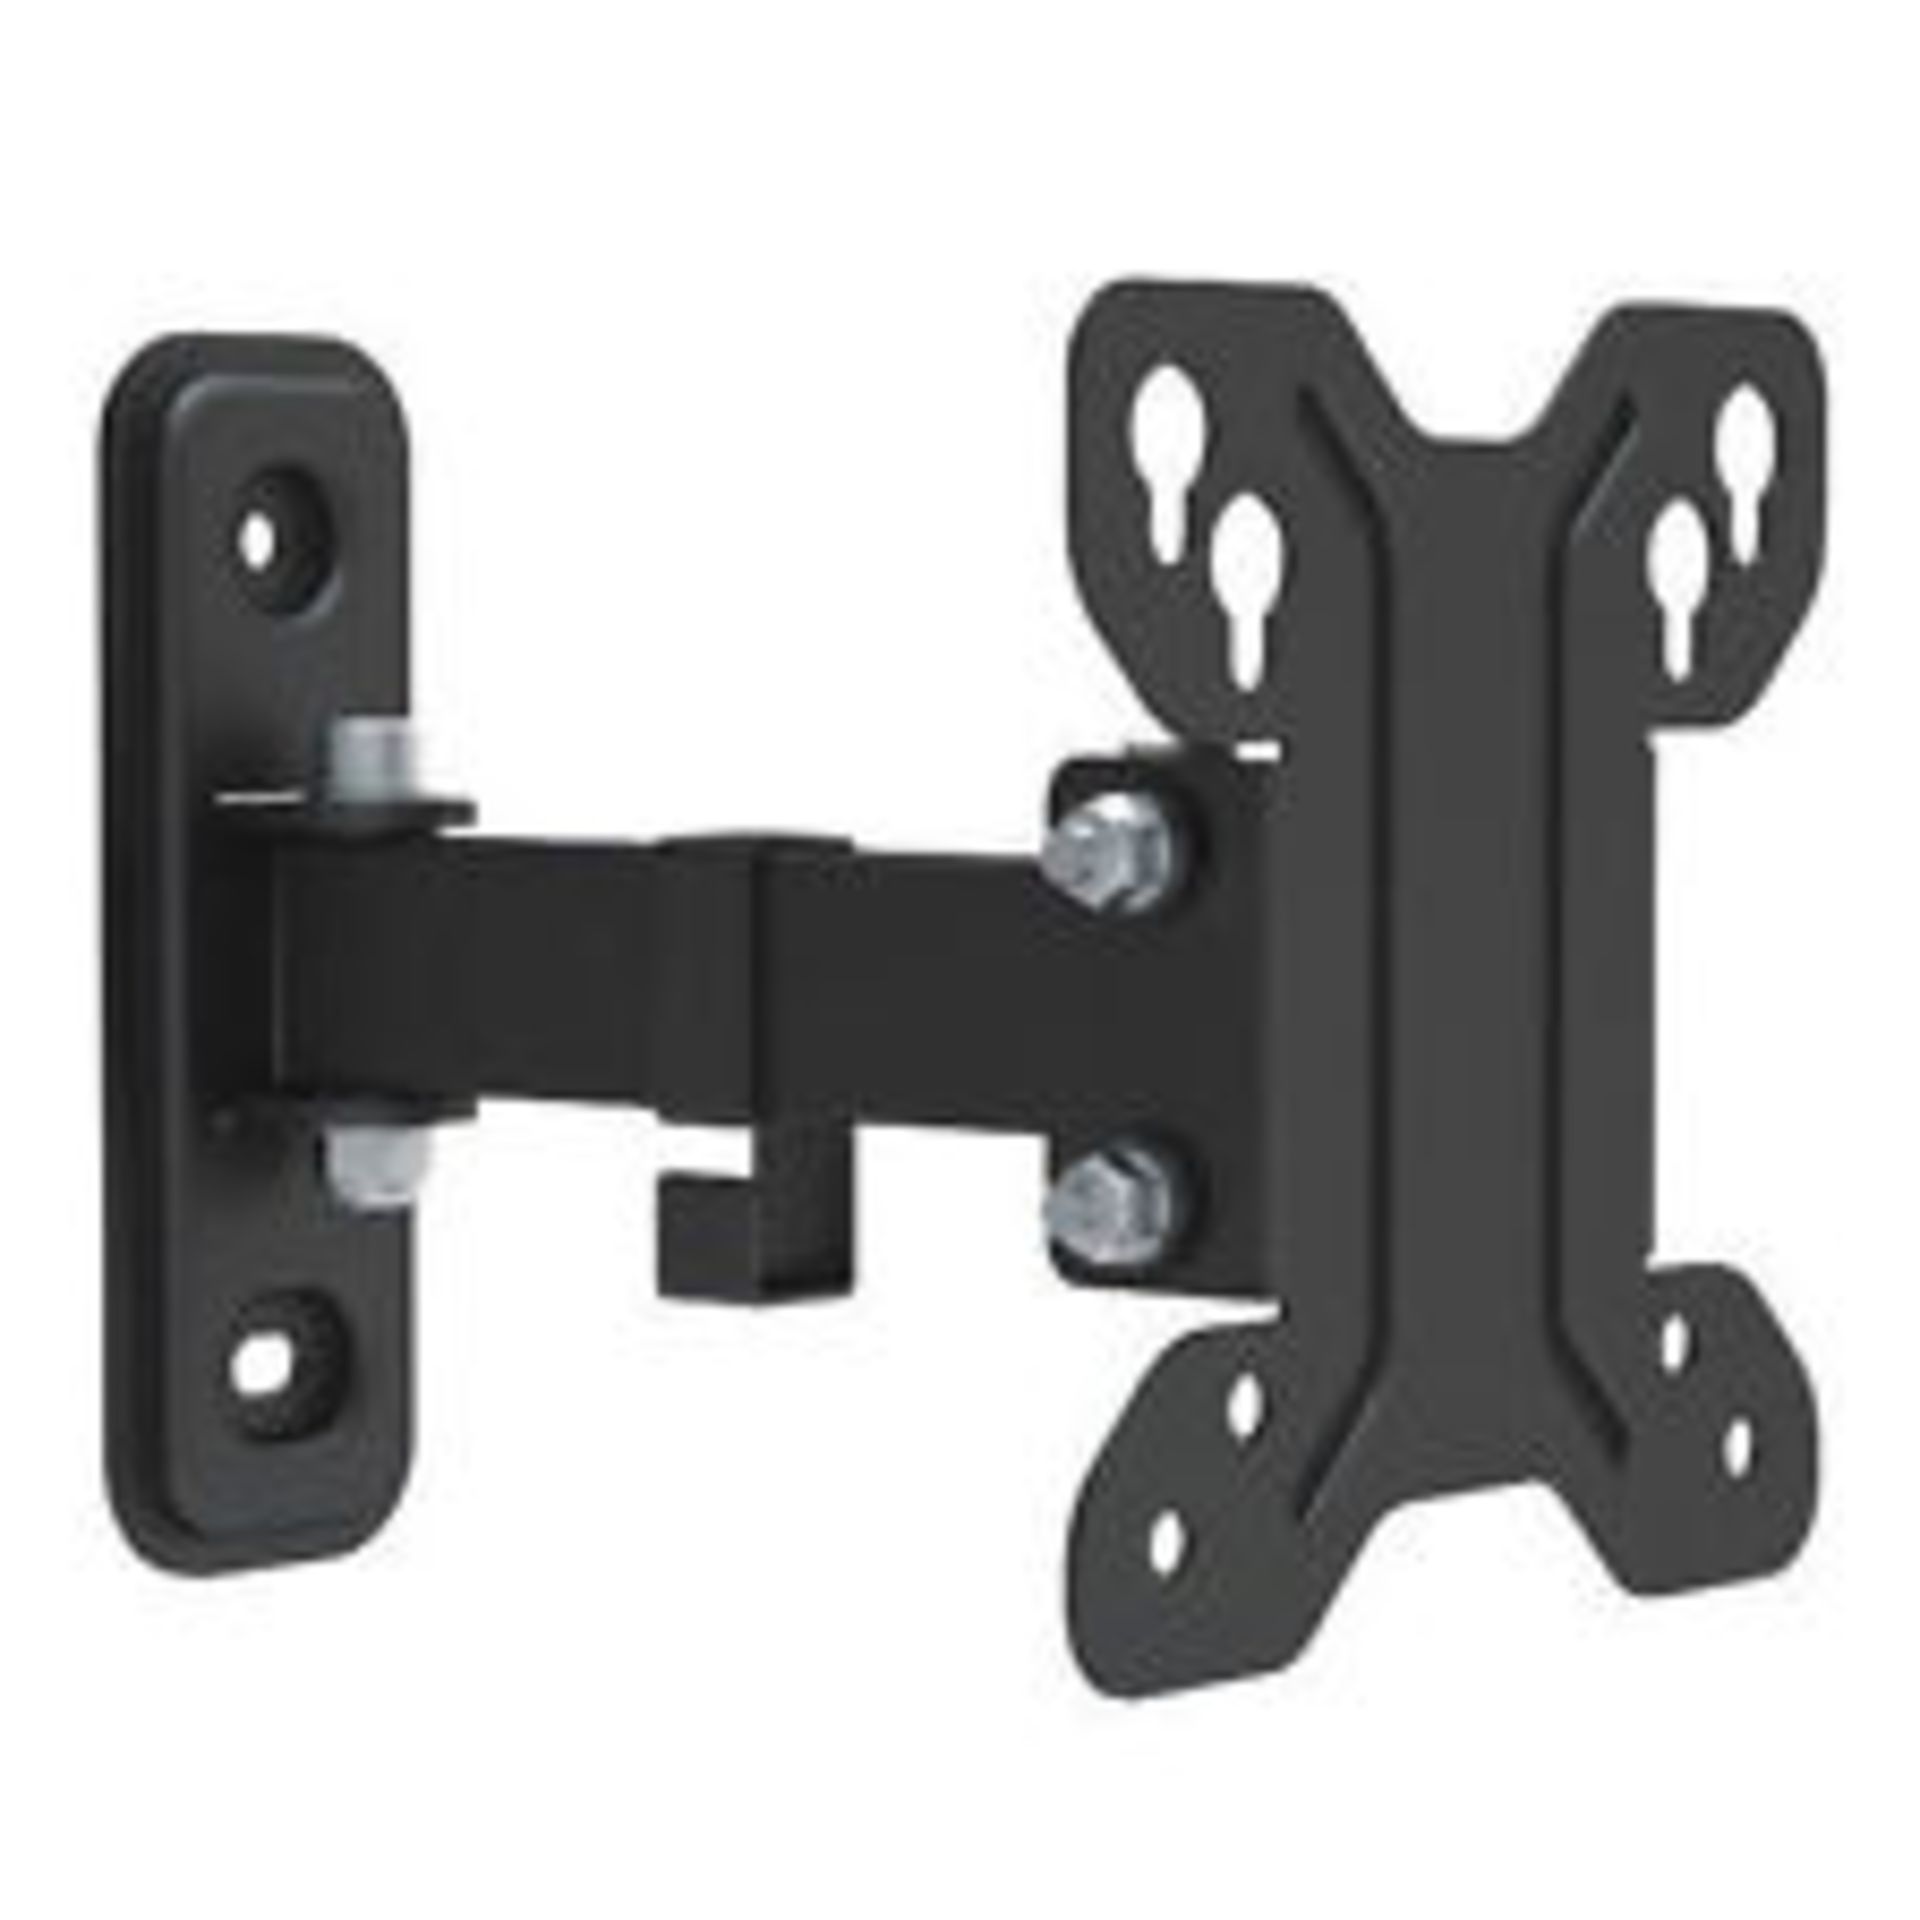 V Brand New LCD TV Tilt Wall Mount To Fit 15-22" TV Maximum load of 15Kg